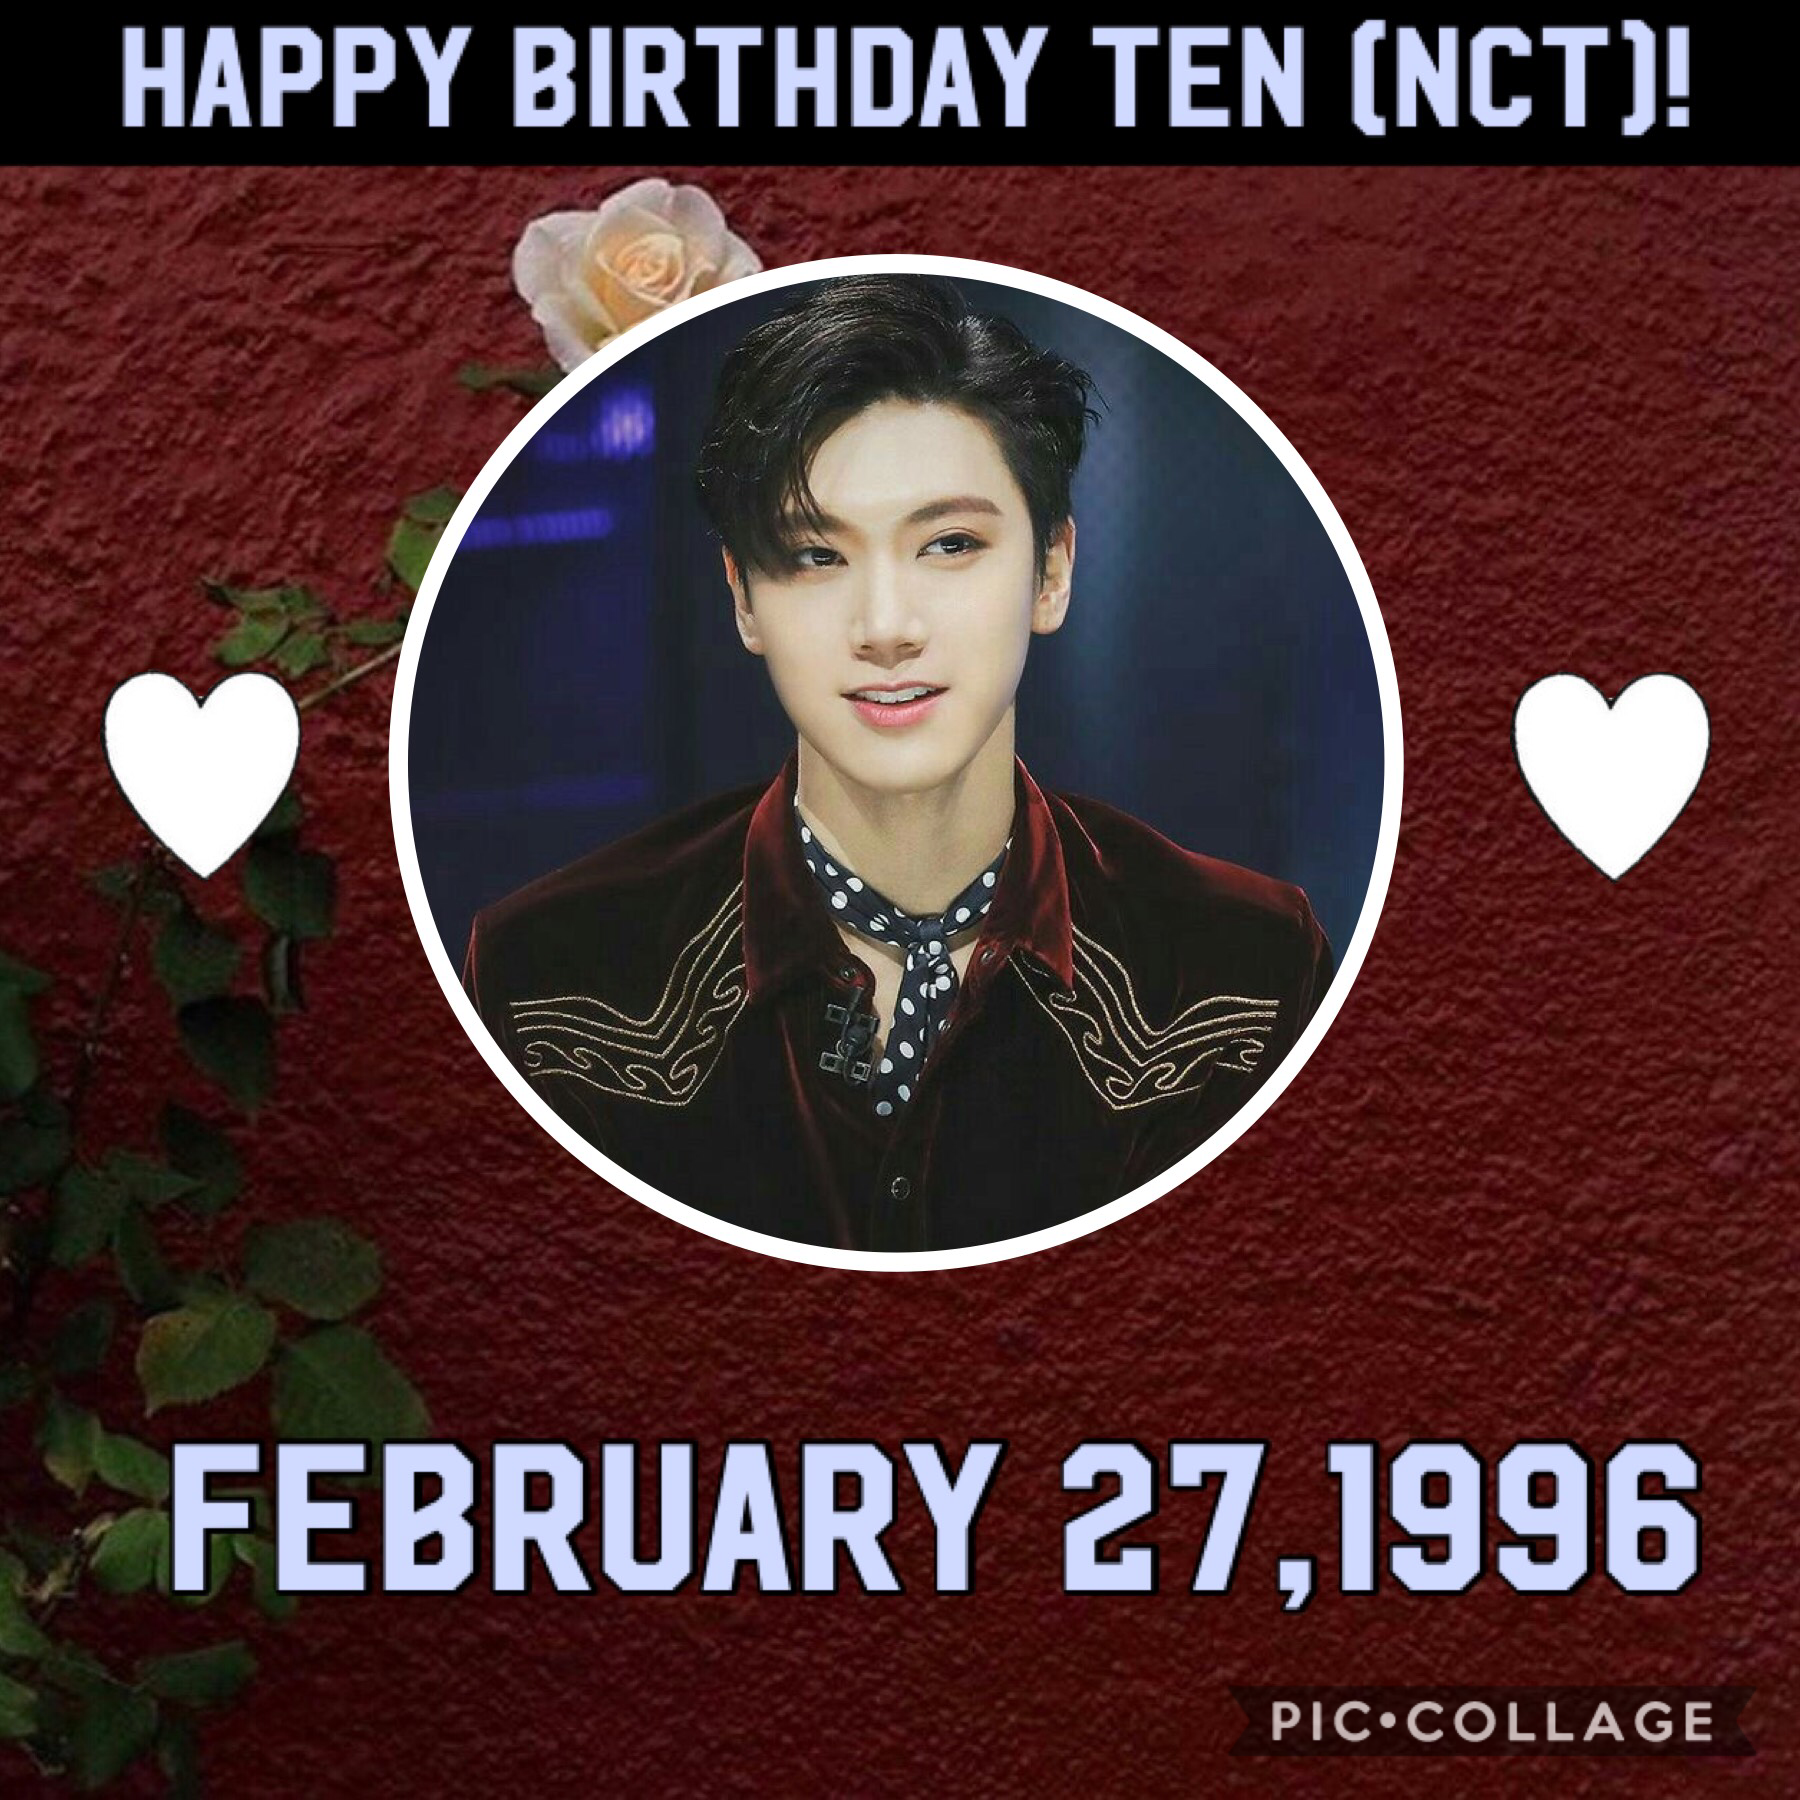 •Chittaphon Leechaiyapornkul•
Happy birthday to this Thai prince💞💞💞 Ten is so funny I remember wàtching NCT Life with him it was greeeat❤️
🎉🎉🎉🎉
Birthday edits coming tomorrow 
⛄️❄️⛄️❄️⛄️❄️⛄️